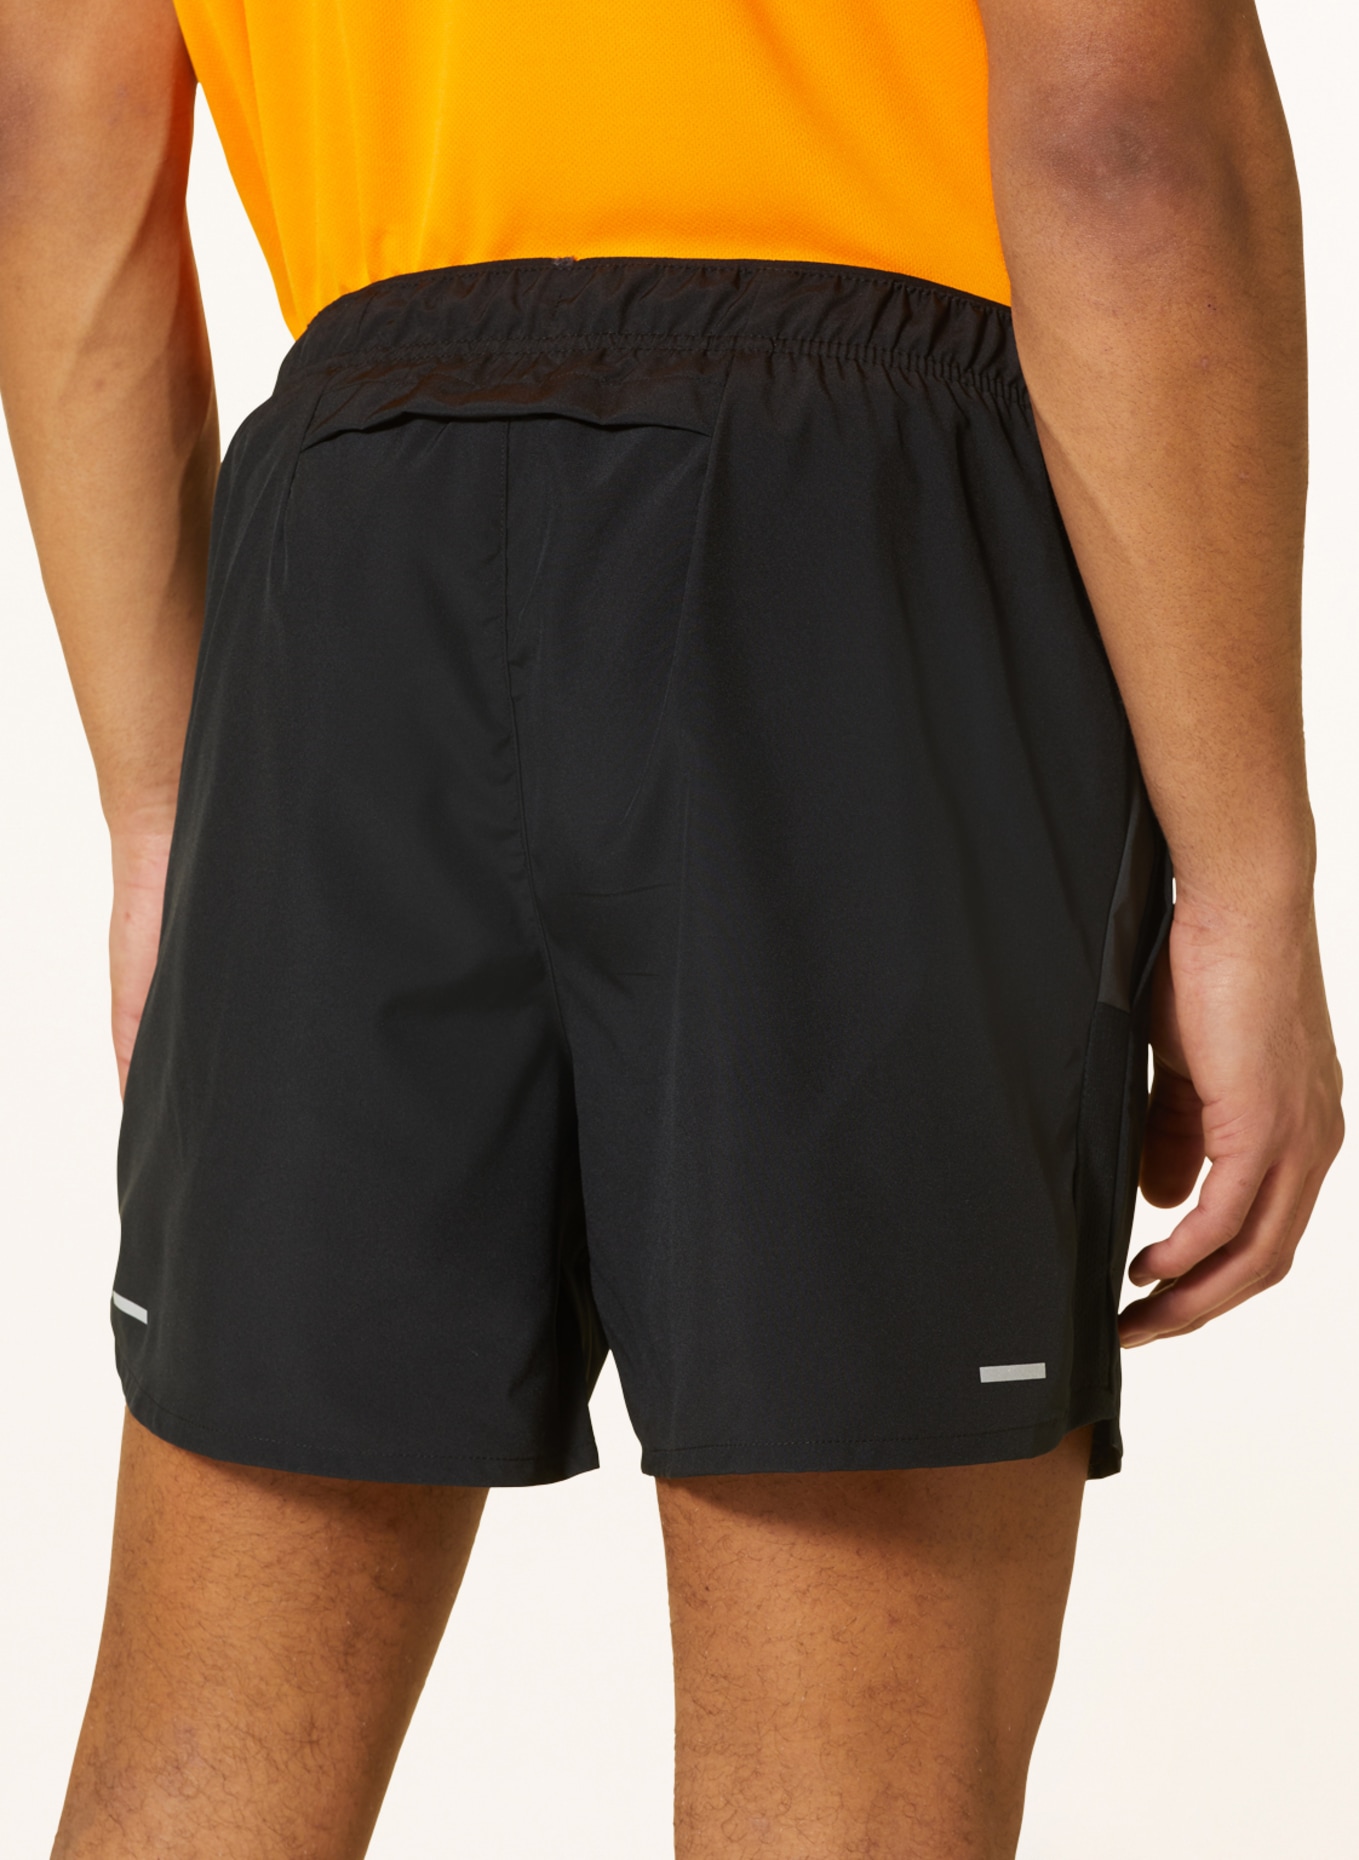 Nike 2-in-1 running shorts DRI-FIT RUN DIVISION CHALLENGE with mesh, Color: BLACK (Image 6)